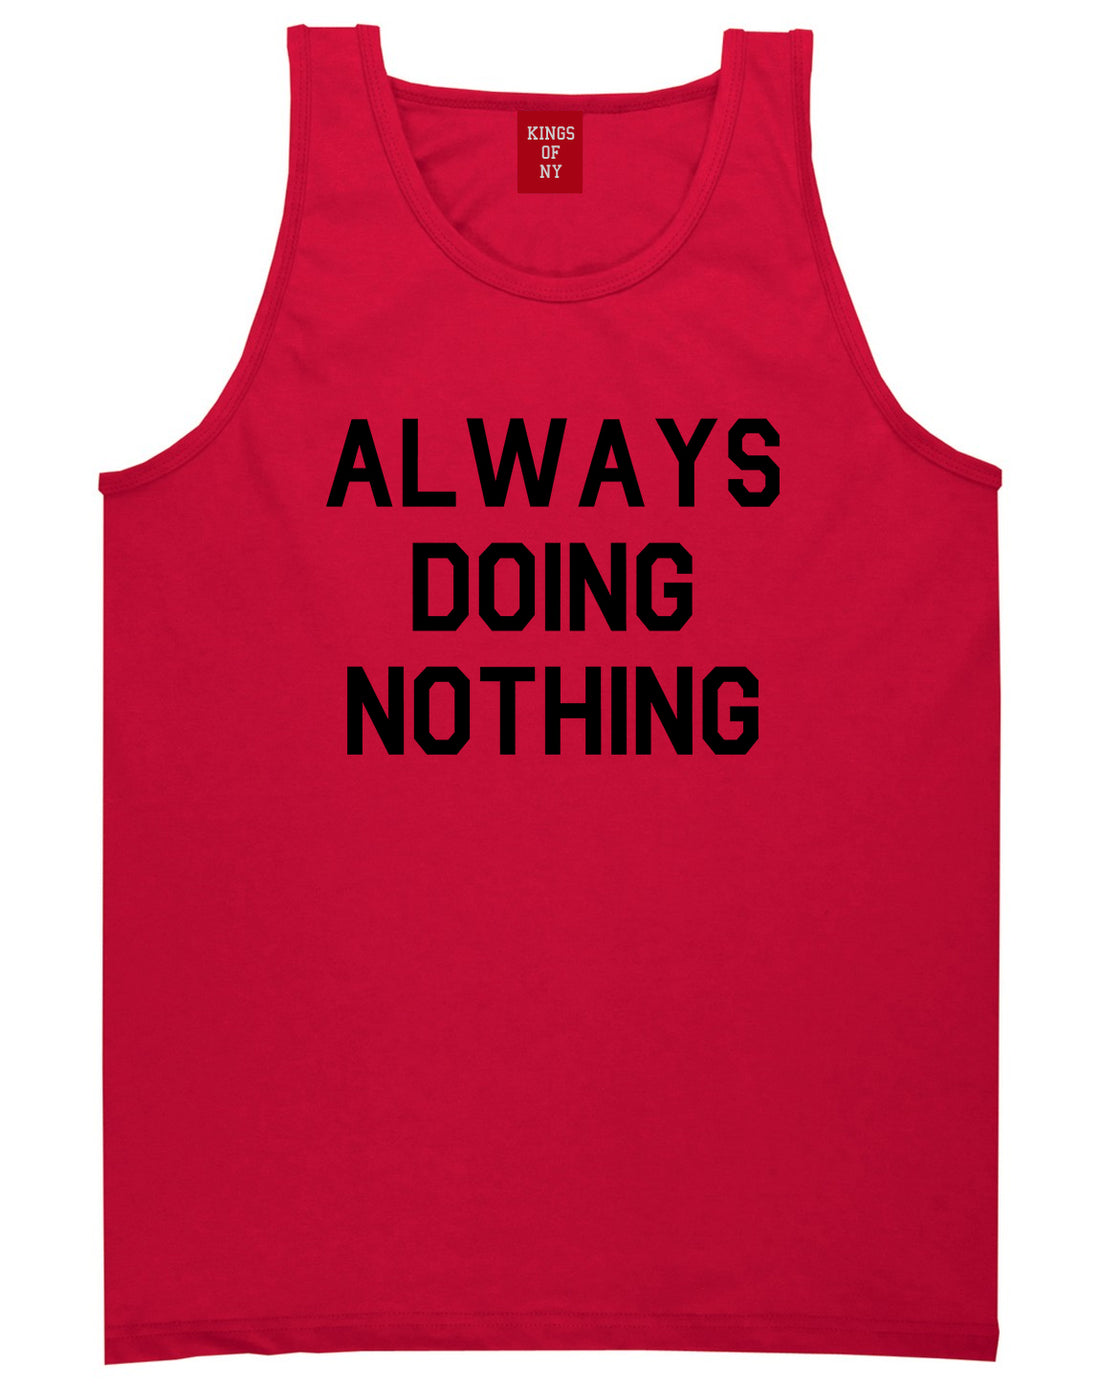 Always_Doing_Nothing Mens Red Tank Top Shirt by Kings Of NY